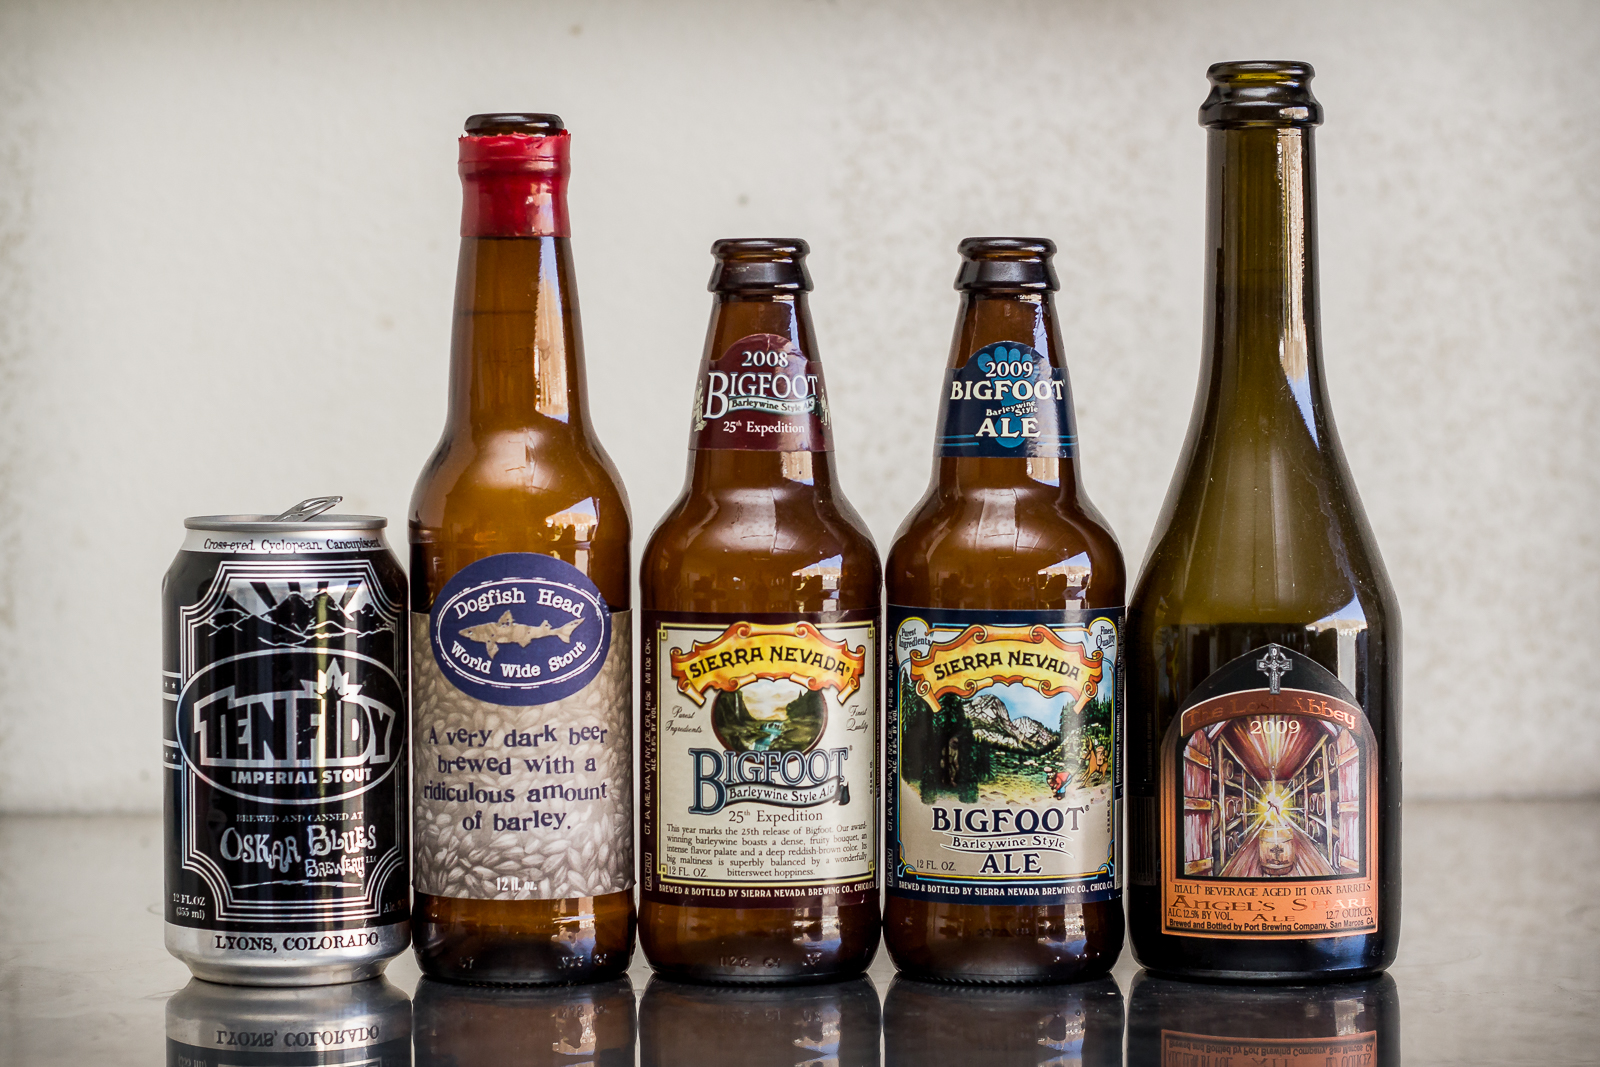 Oskar Blues Brewery, Sierra Nevada Brewing Company, Dogfish Head Brewery, and The Lost Abbey beers.